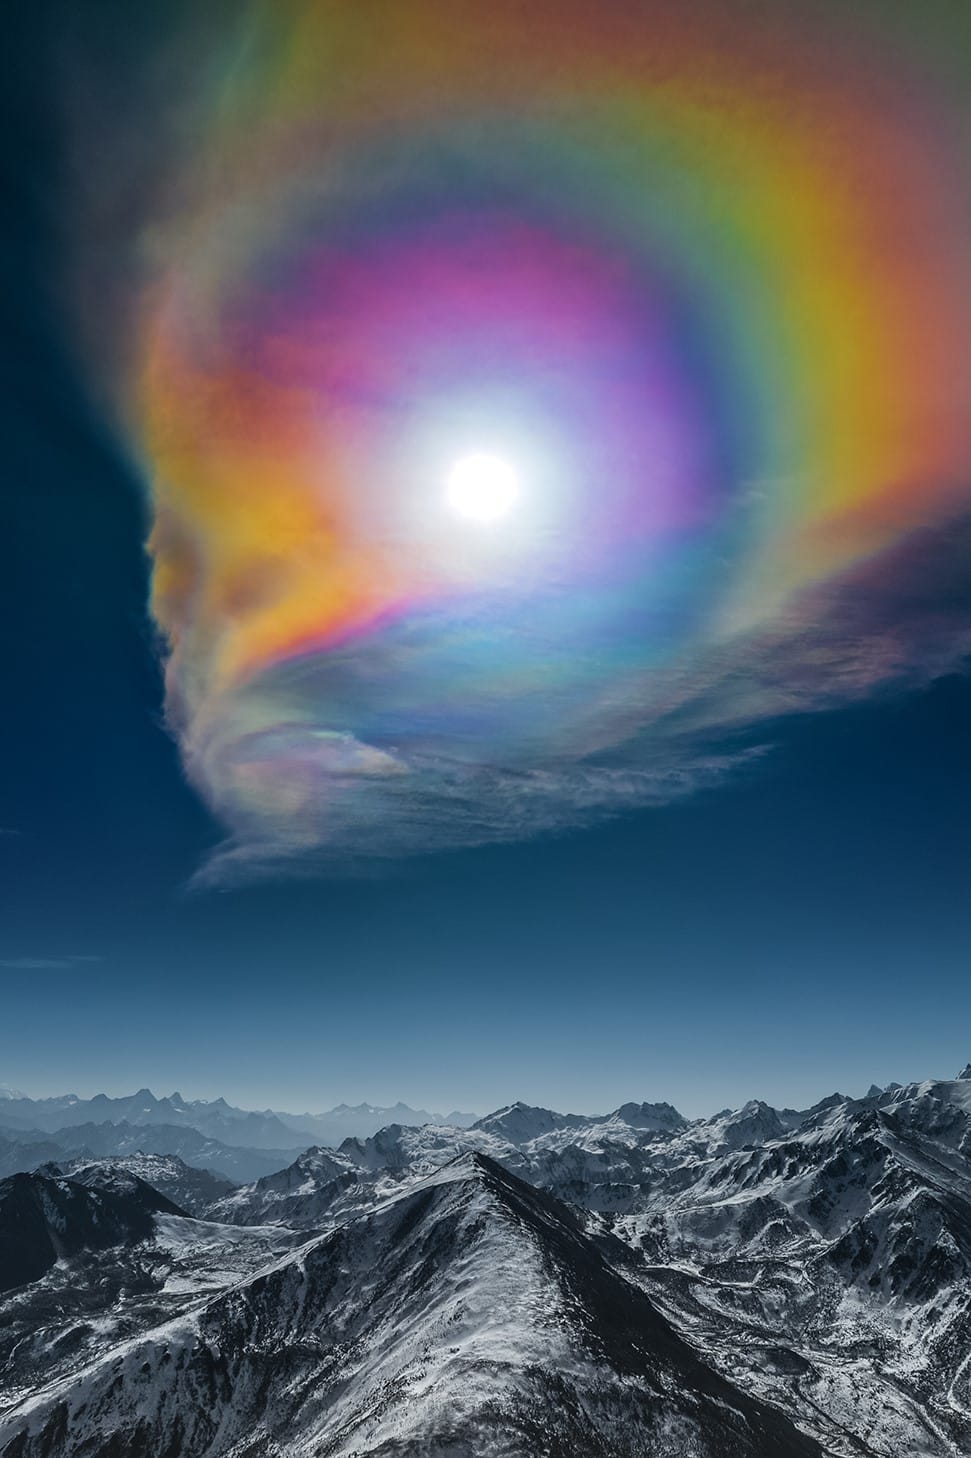 During the Spring Festival, the Sun and altostratus clouds acted together to create this huge corona, soaring above the Himalayas. 